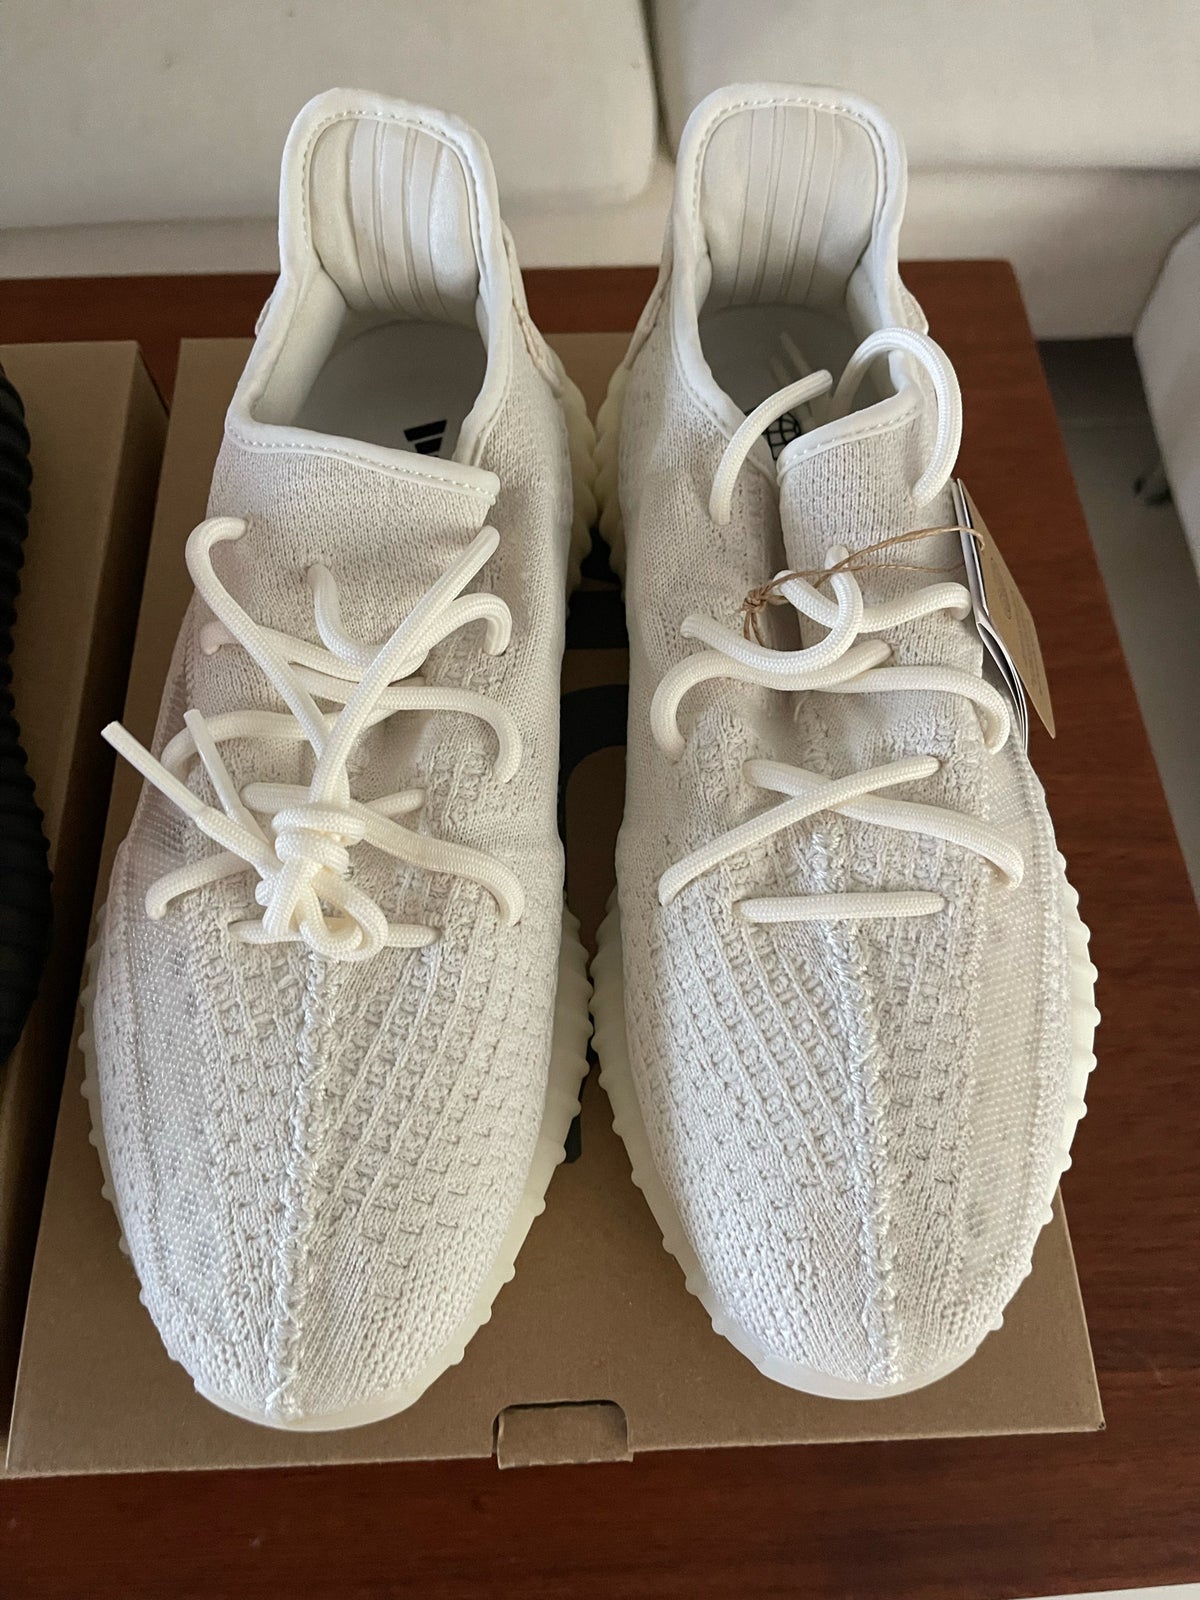 Sneakers, Adidas Yeezy Boost 350 v2, str. 43,5